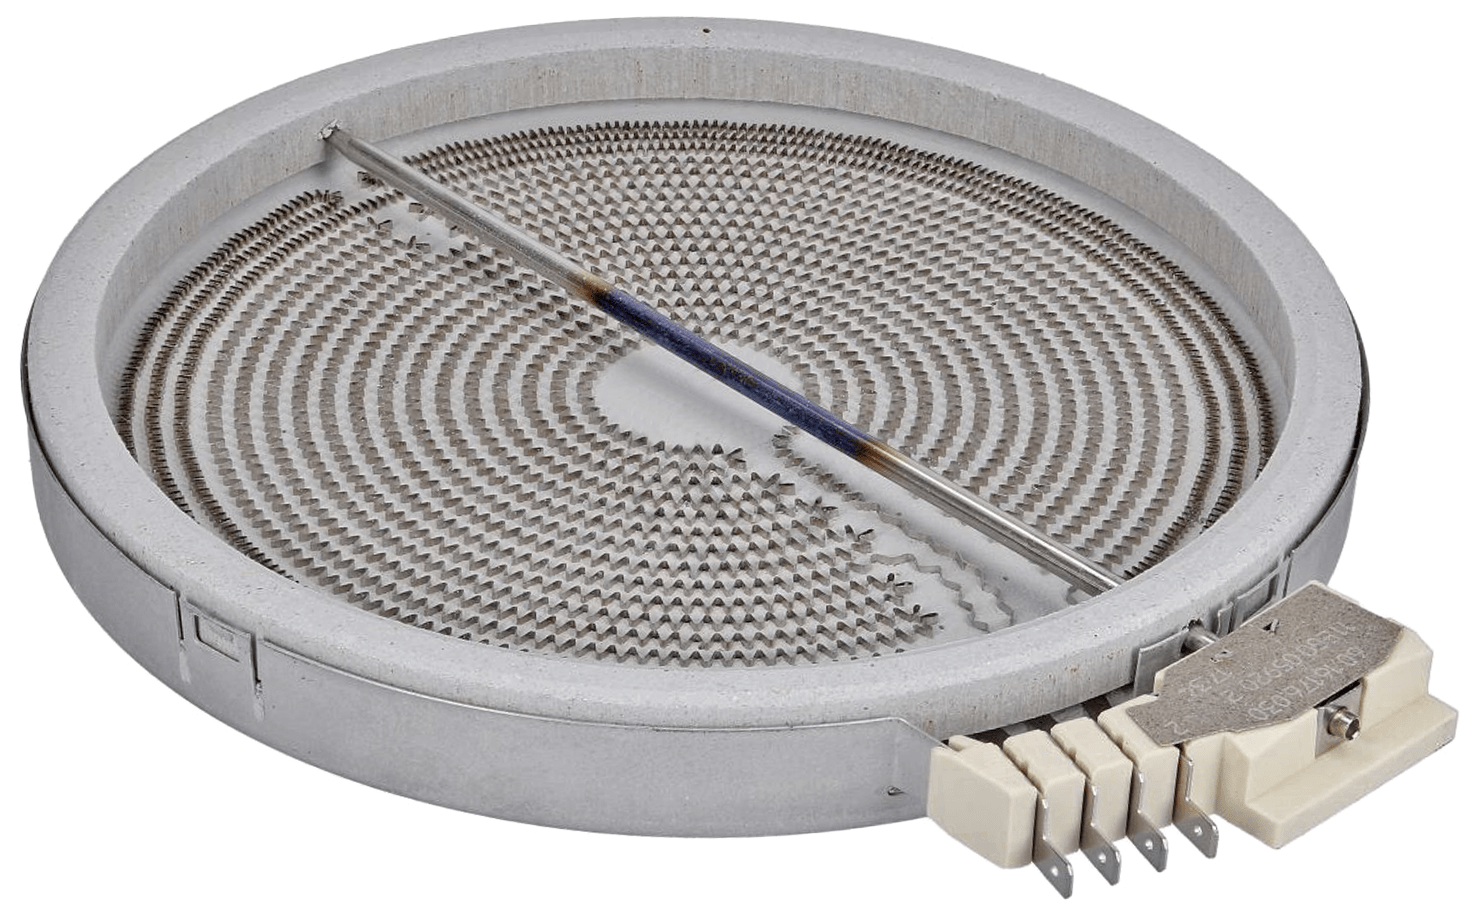 Heating element (for ceramic surface) Ø230(210)mm, 2300/1600/800W, three-zone AEG, ELECTROLUX, ZANUSSI Hotplate elements for electric stoves